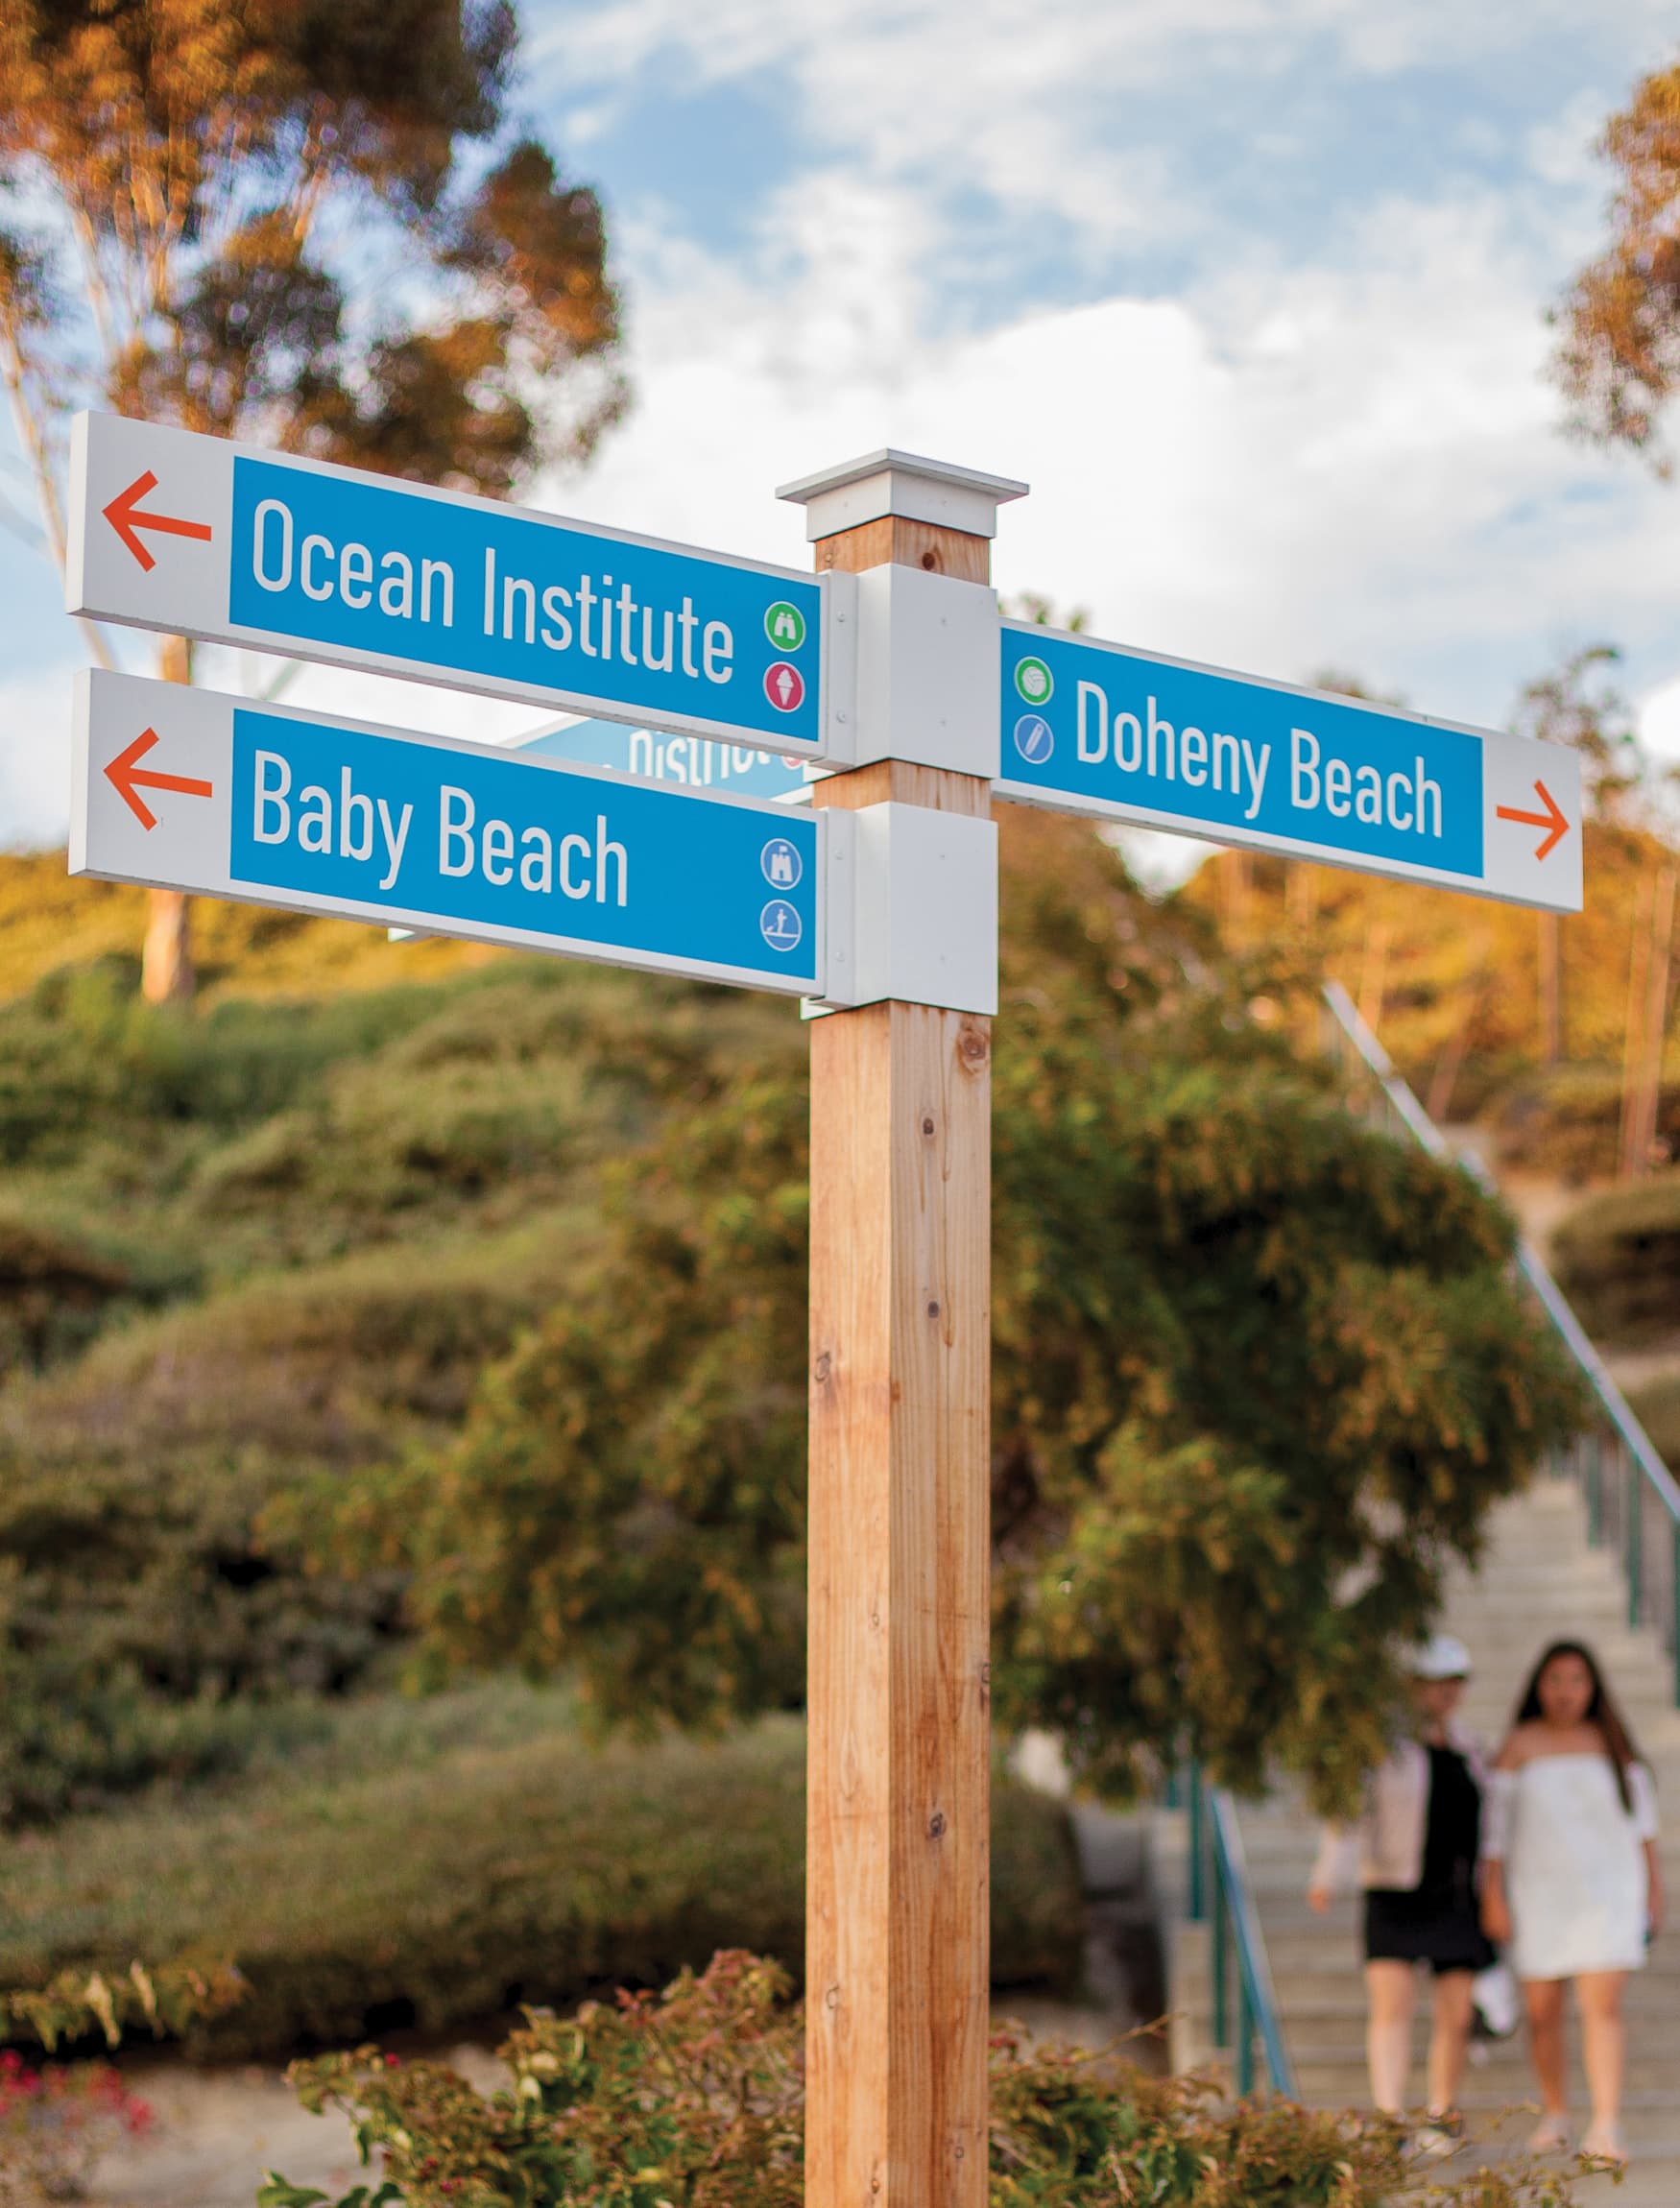 The City of Dana Point branded wayfinding directional sign